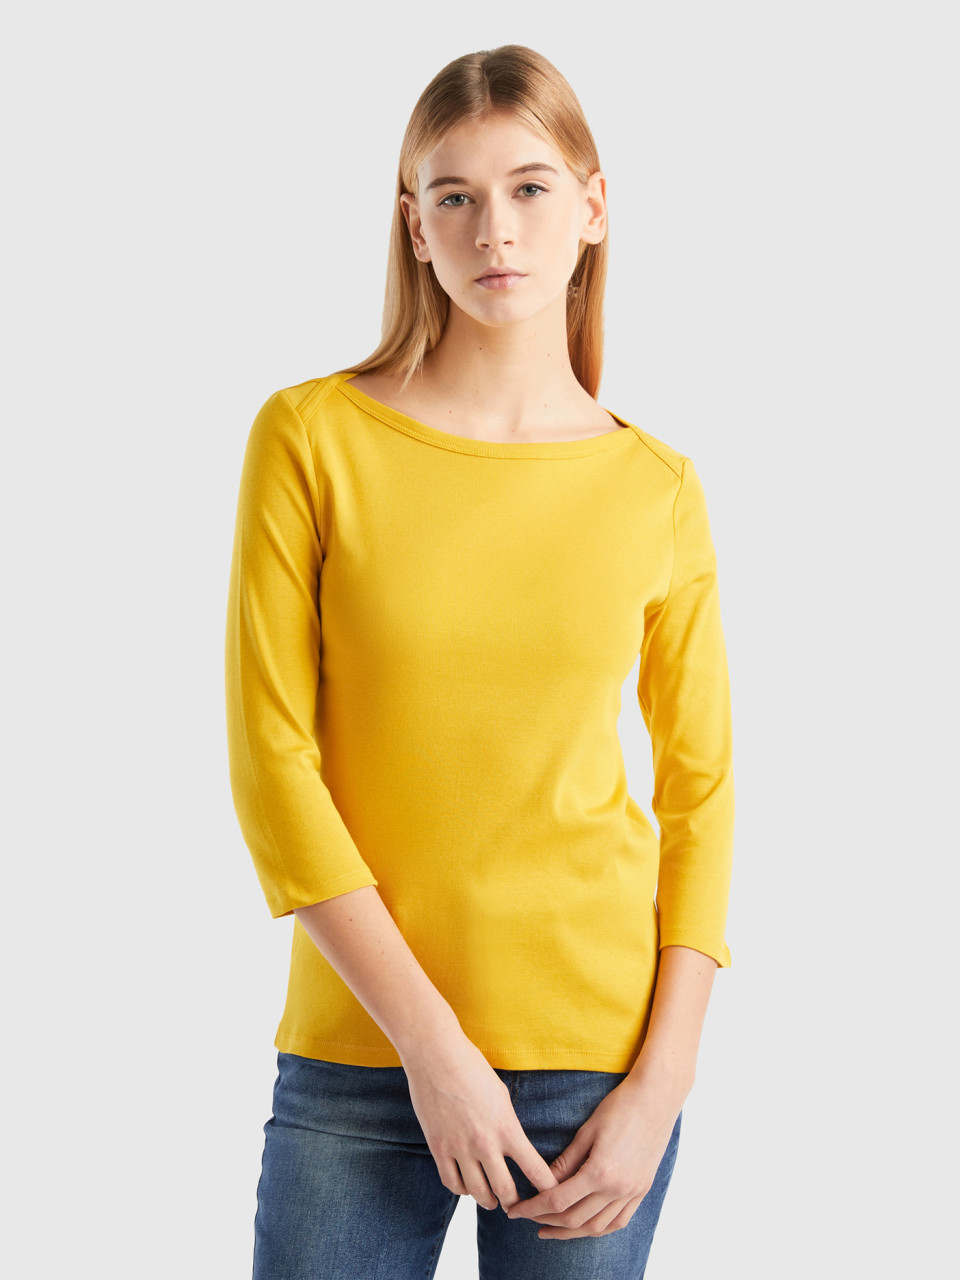 Benetton, T-shirt With Boat Neck In 100% Cotton, Yellow, Women